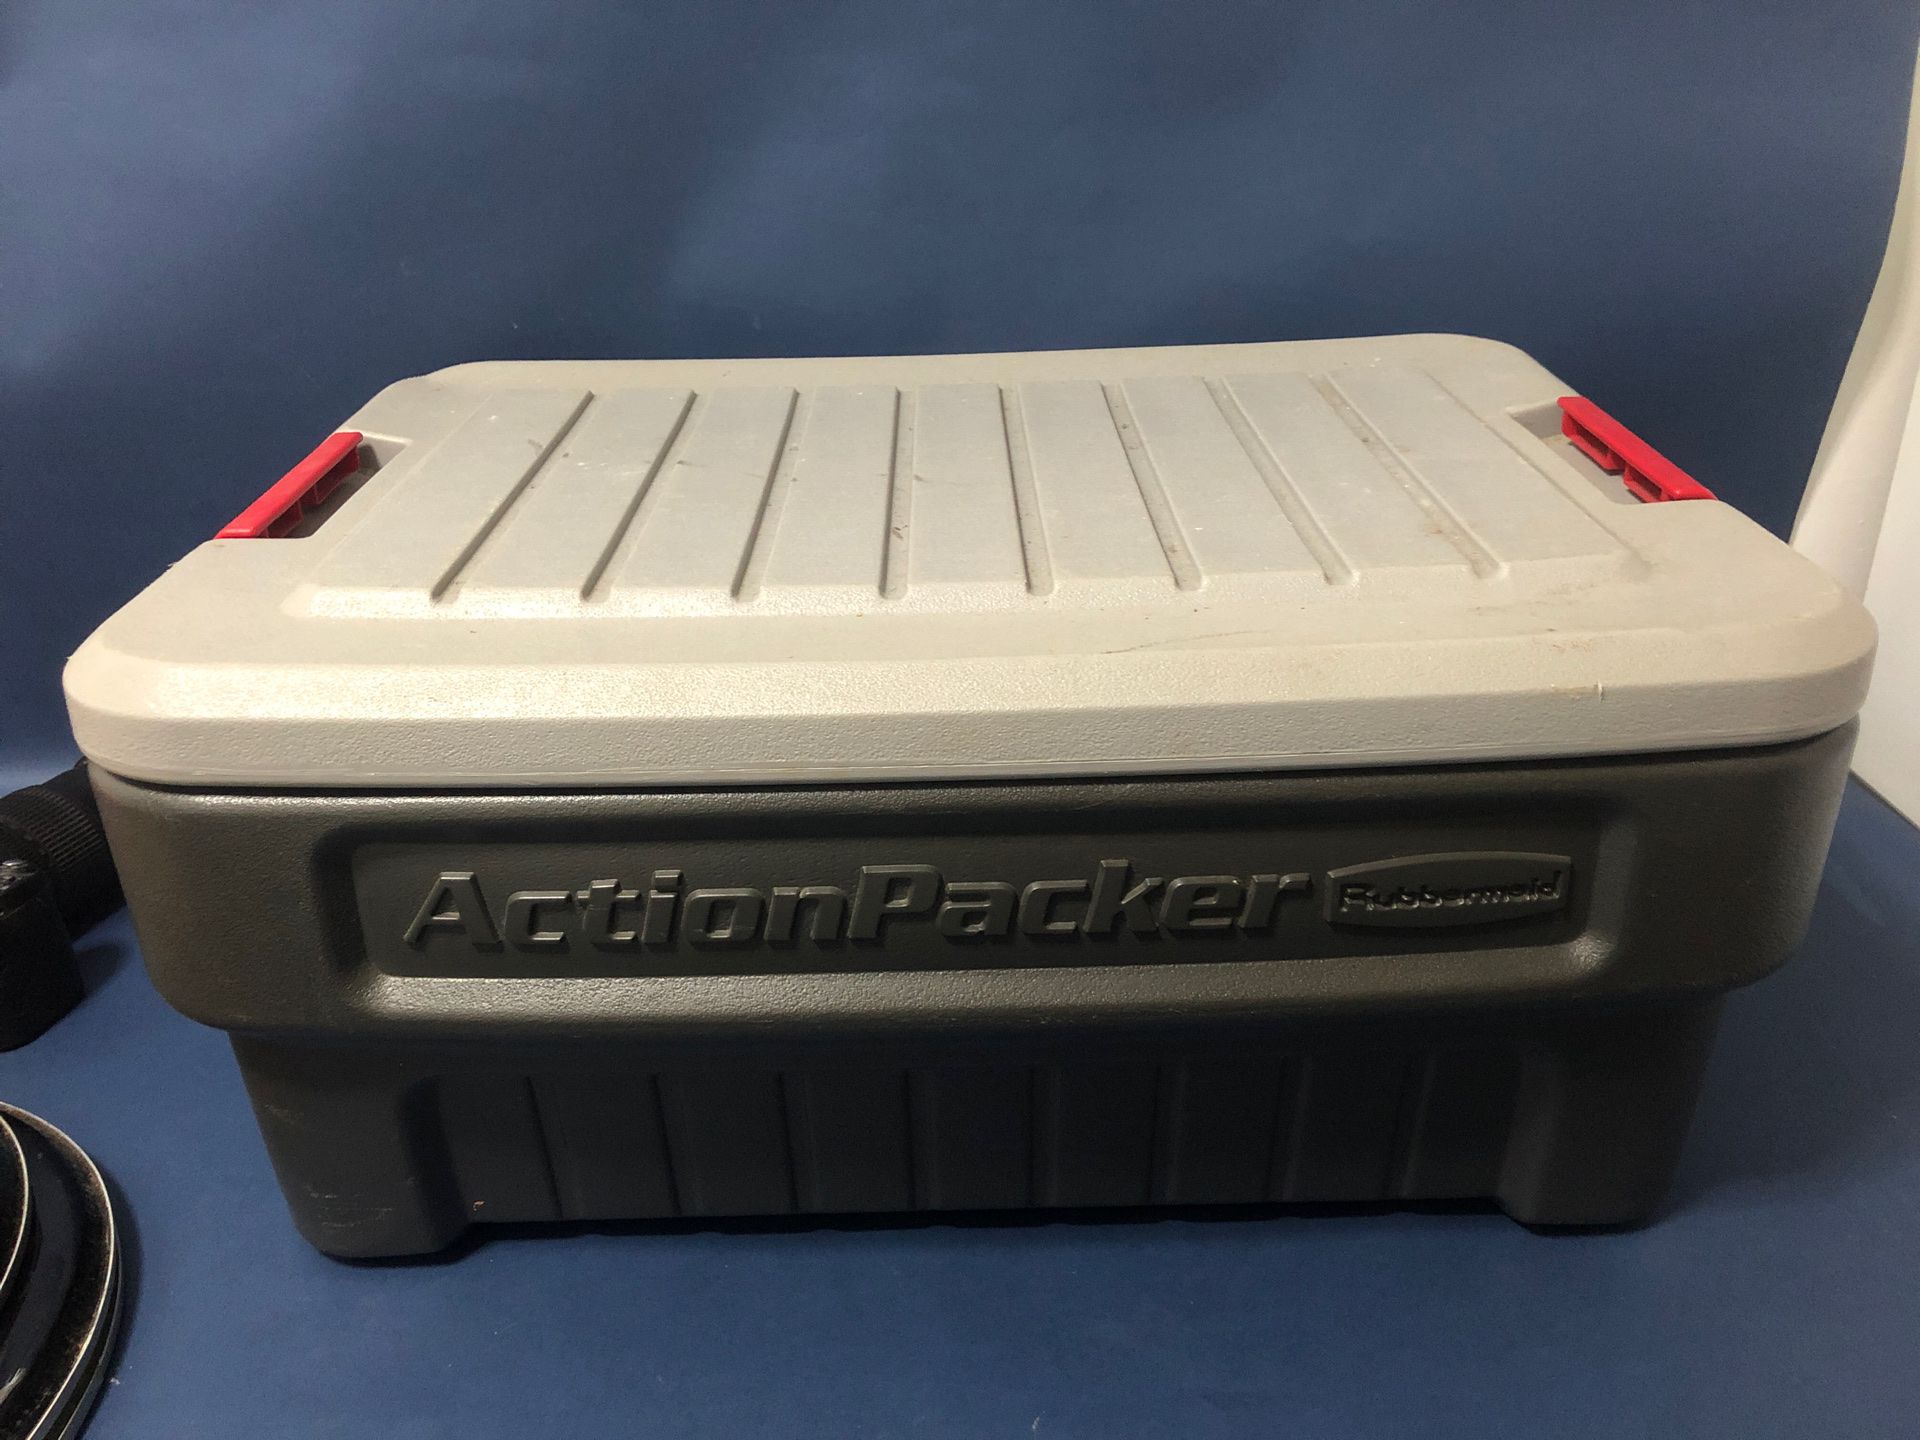 Rubbermaid Action Packer - general for sale - by owner - craigslist